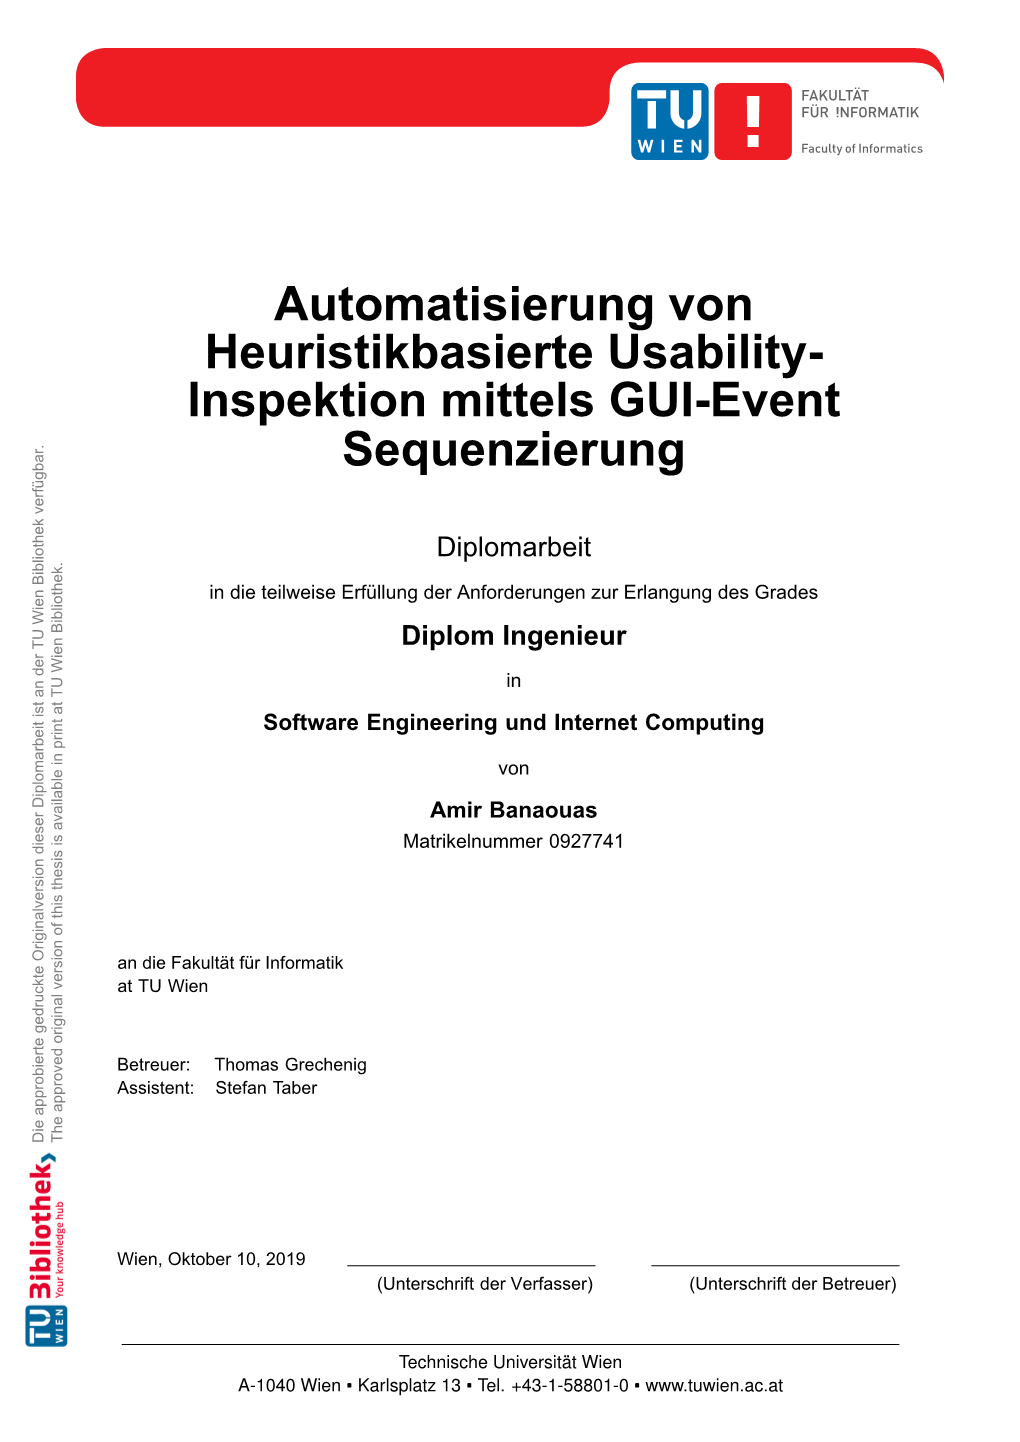 Automation of Heuristic-Based Usability Inspection